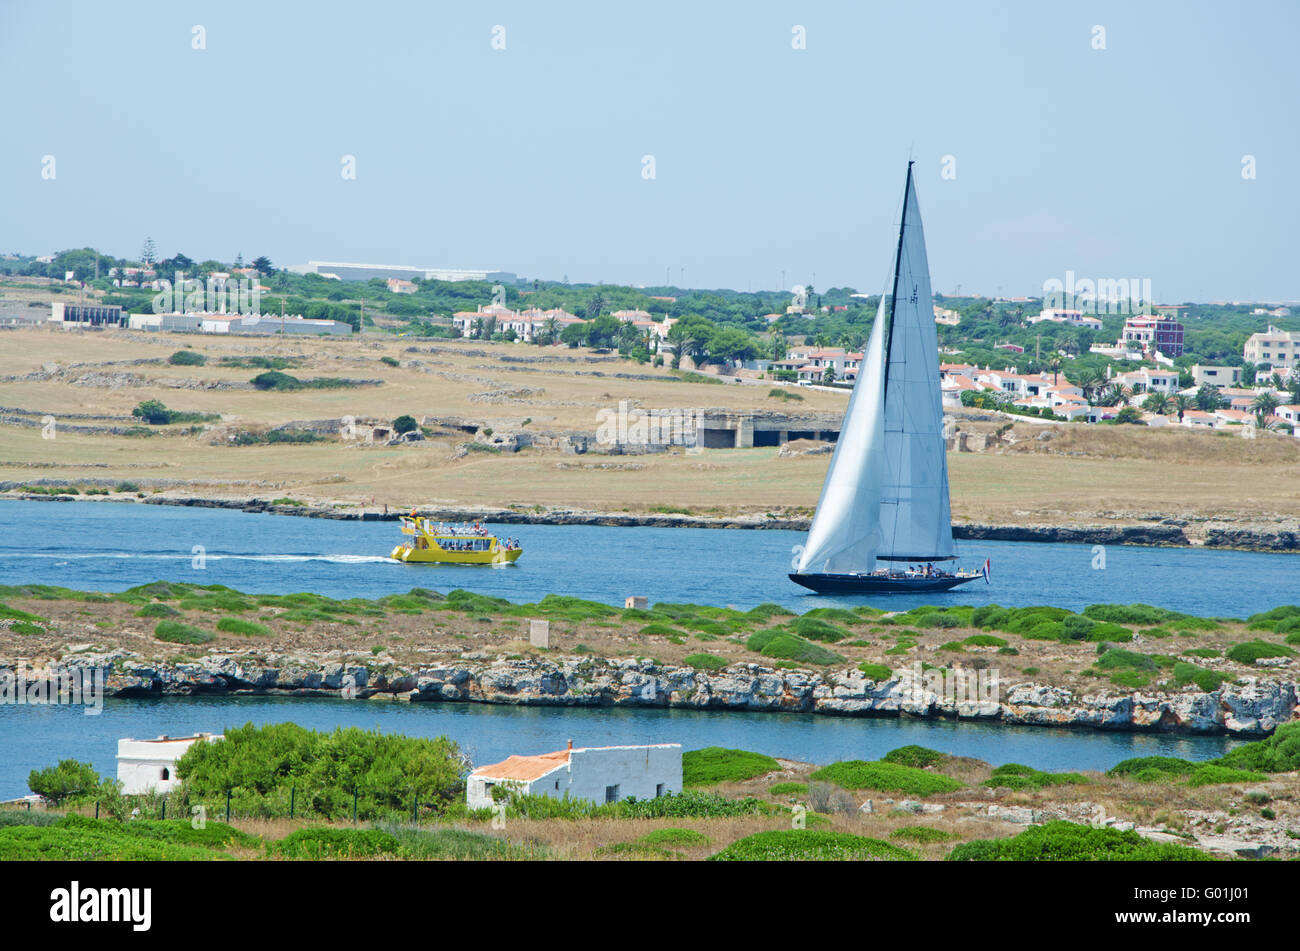 Menorca, Balearic Islands, Spain, Europe: a sailboat approaching in the port of Mahon seen from the Fortress of La Mola Stock Photo